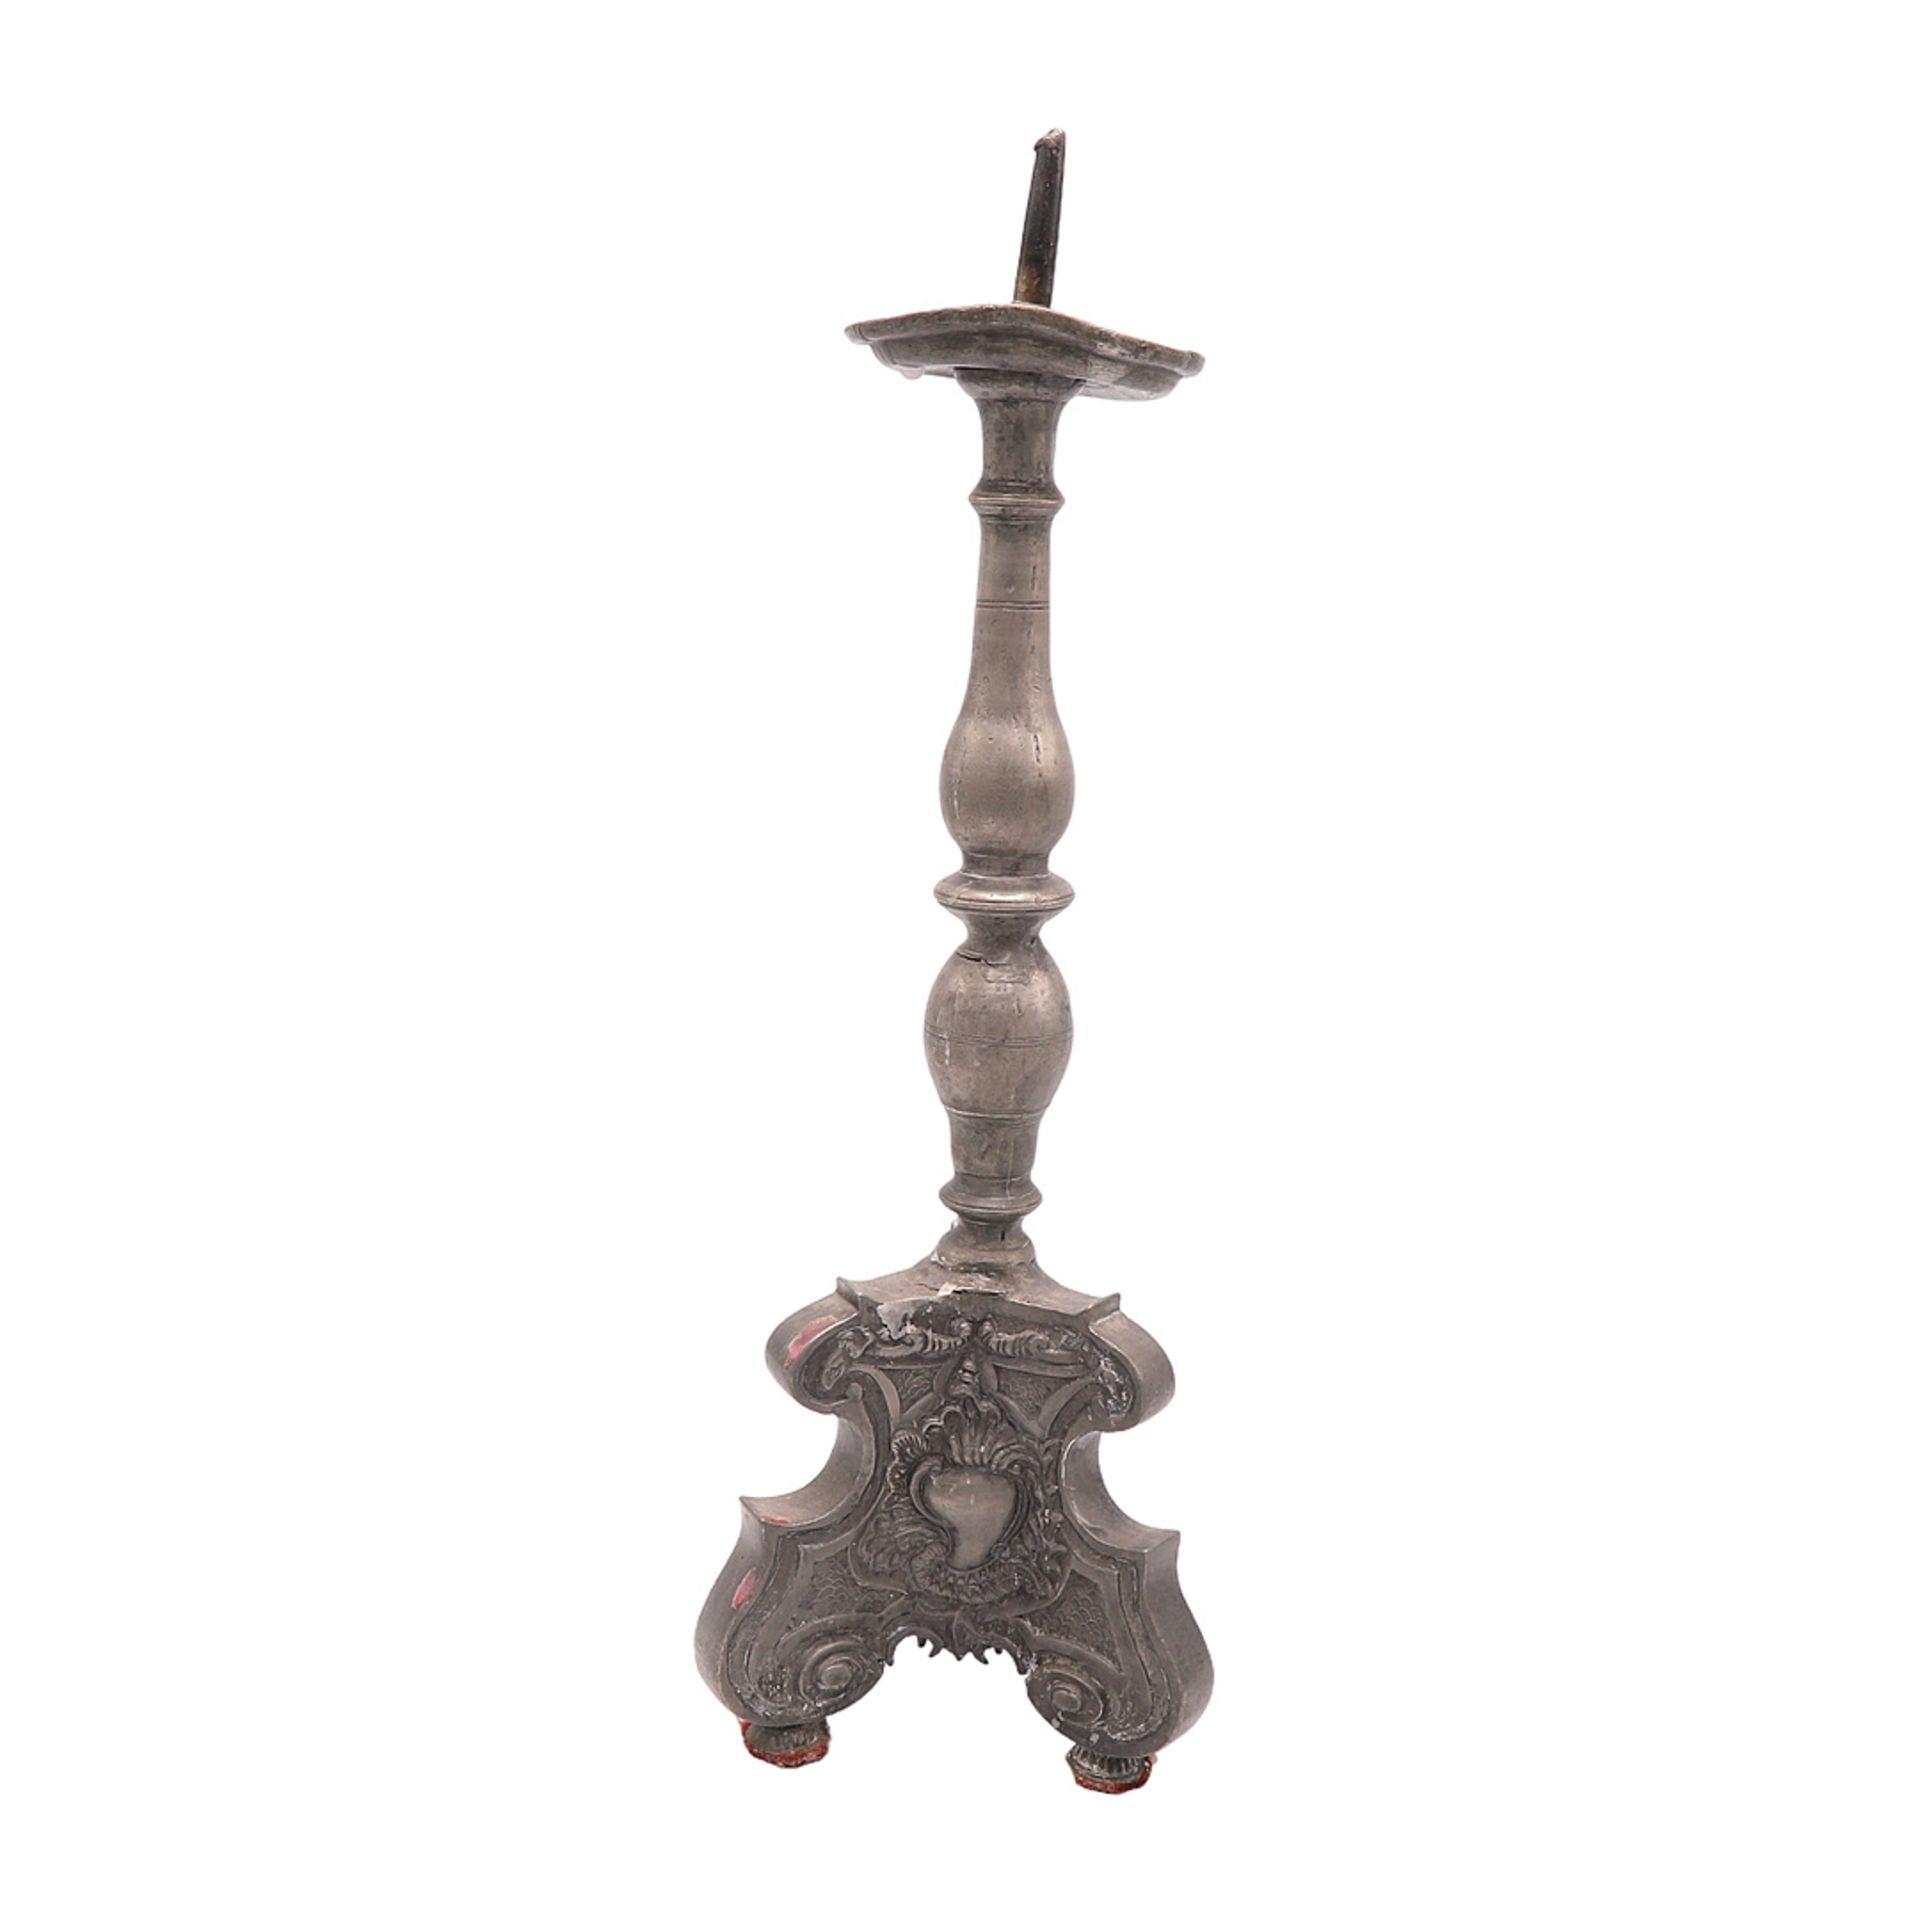 Baroque style candlesticks - Image 3 of 3